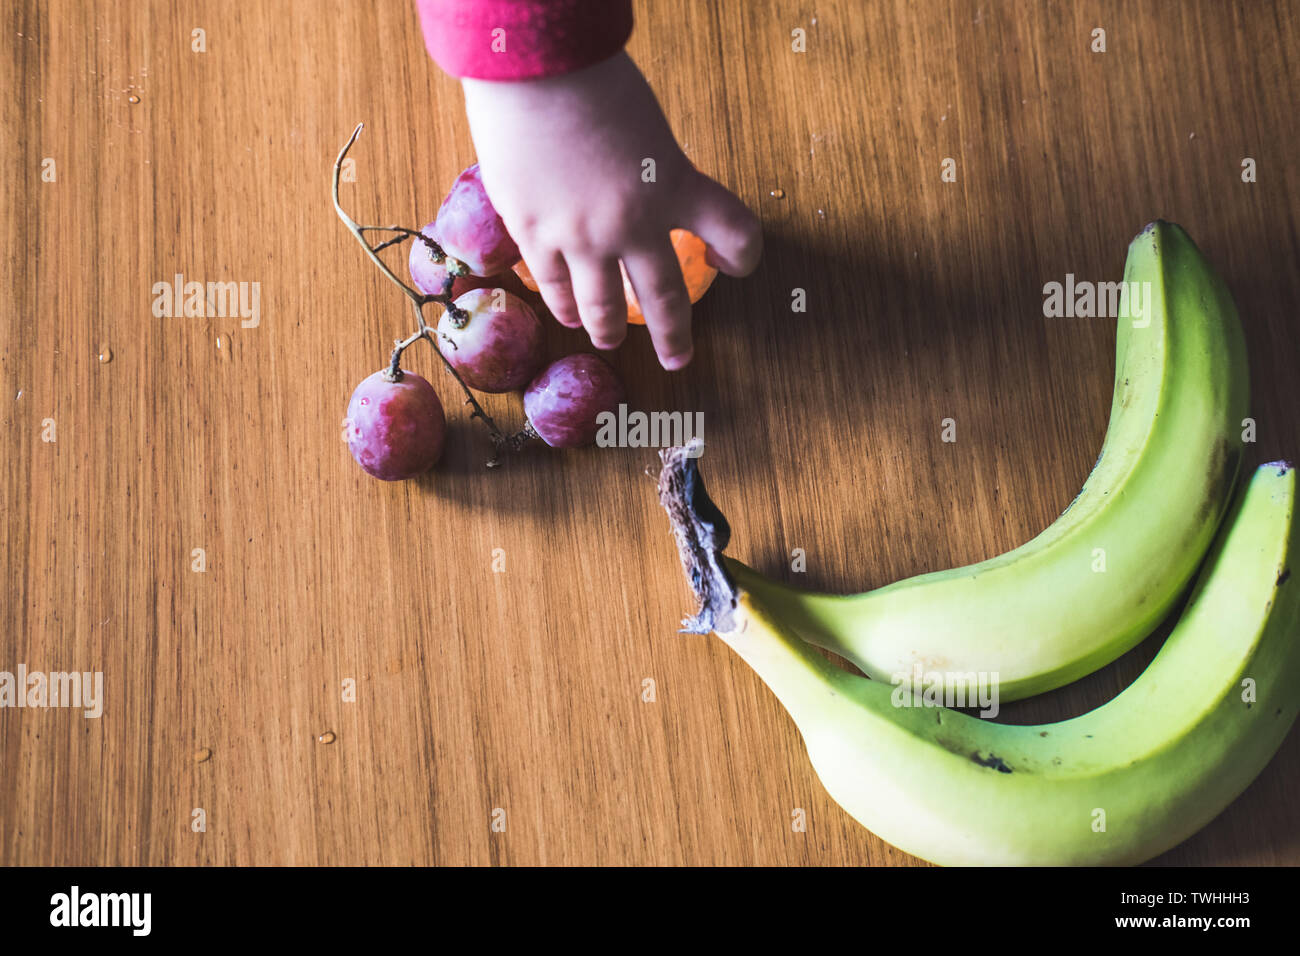 Baby s hand manipulating different fruits on a wooden table Stock Photo